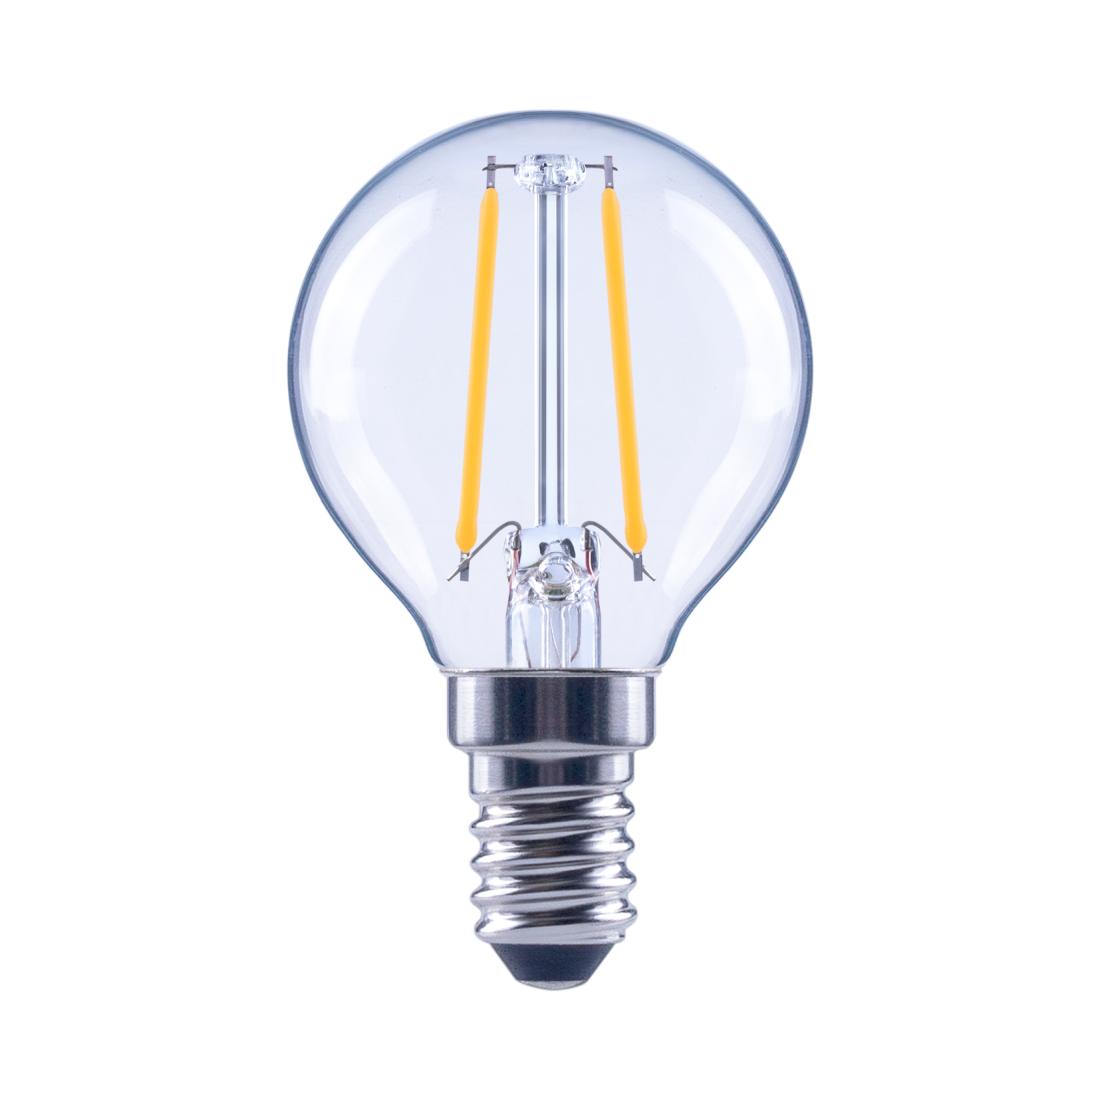 abx High-Res Image - Xavax, LED Filament, E14, 250 lm Replaces 25 W, Drop Bulb, warm white